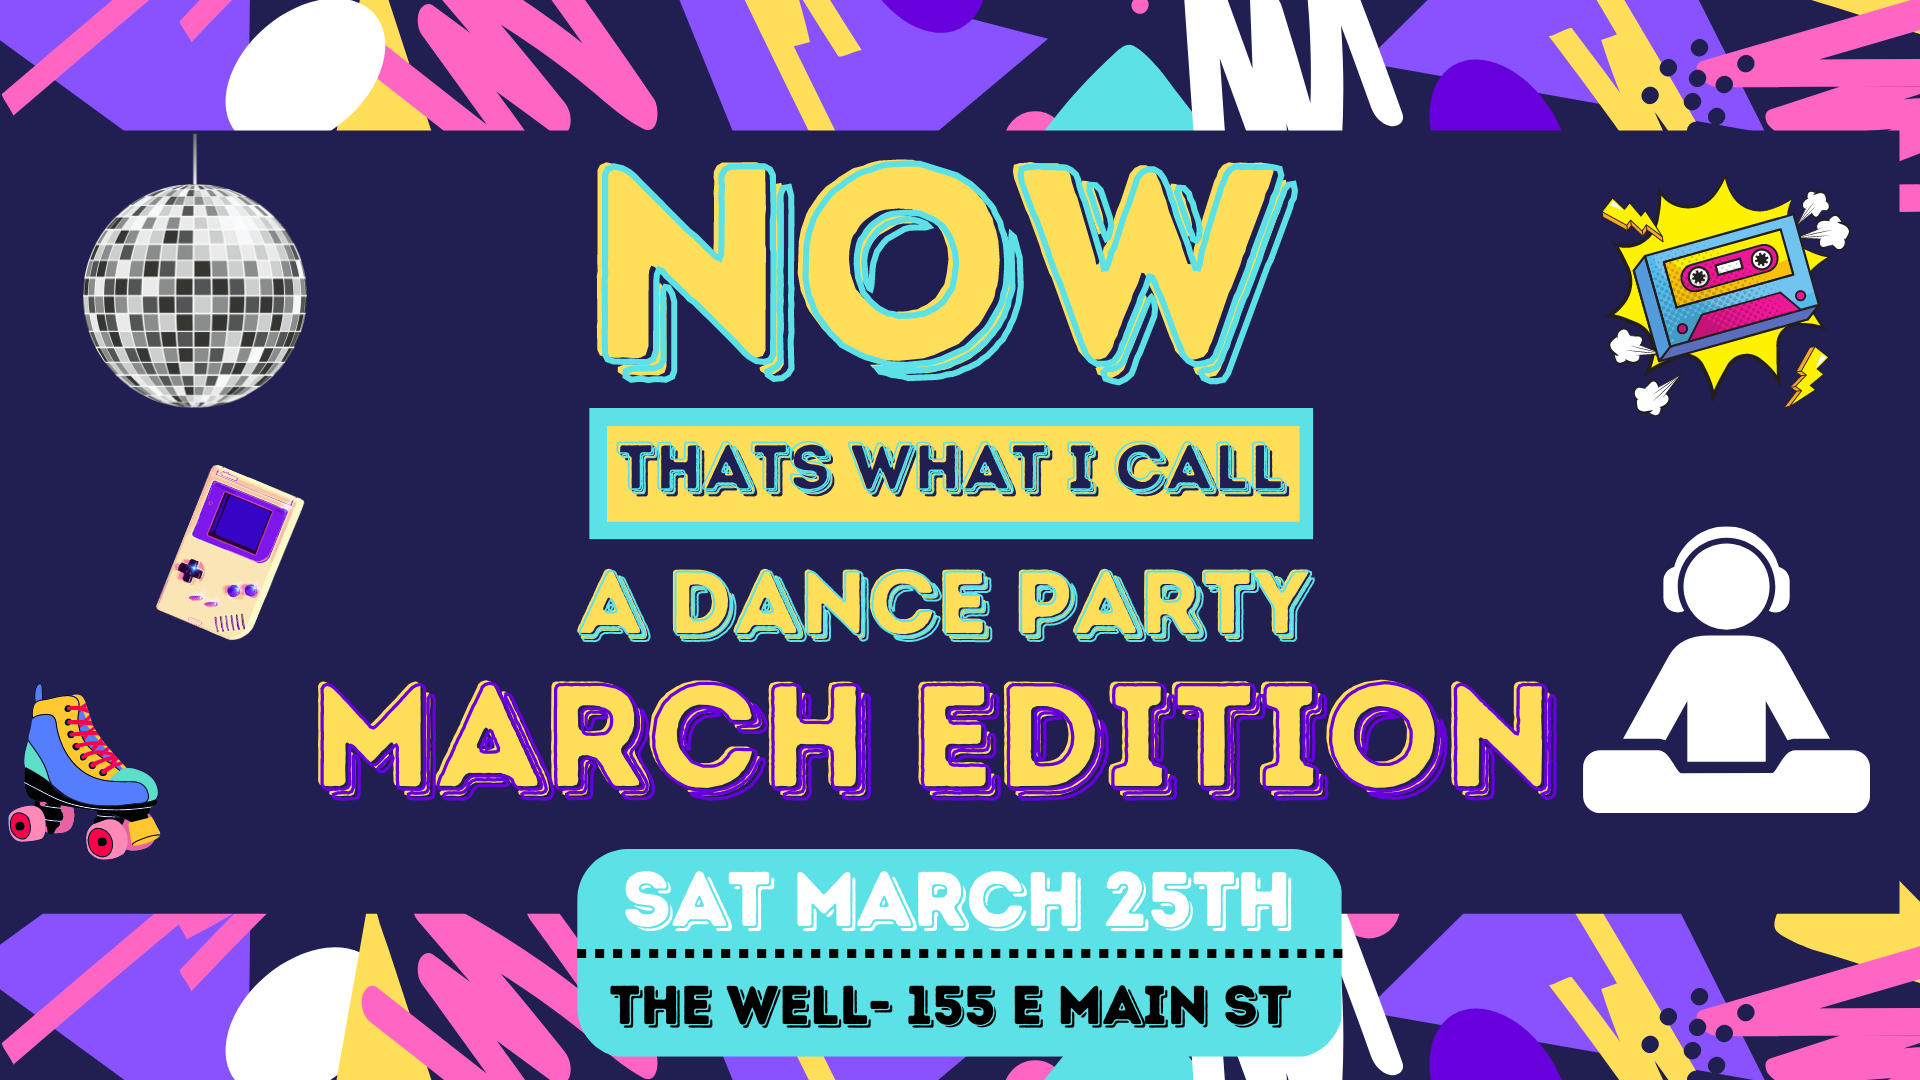 Now That's What I Call a Dance Party. March Edition w/ Live DJ